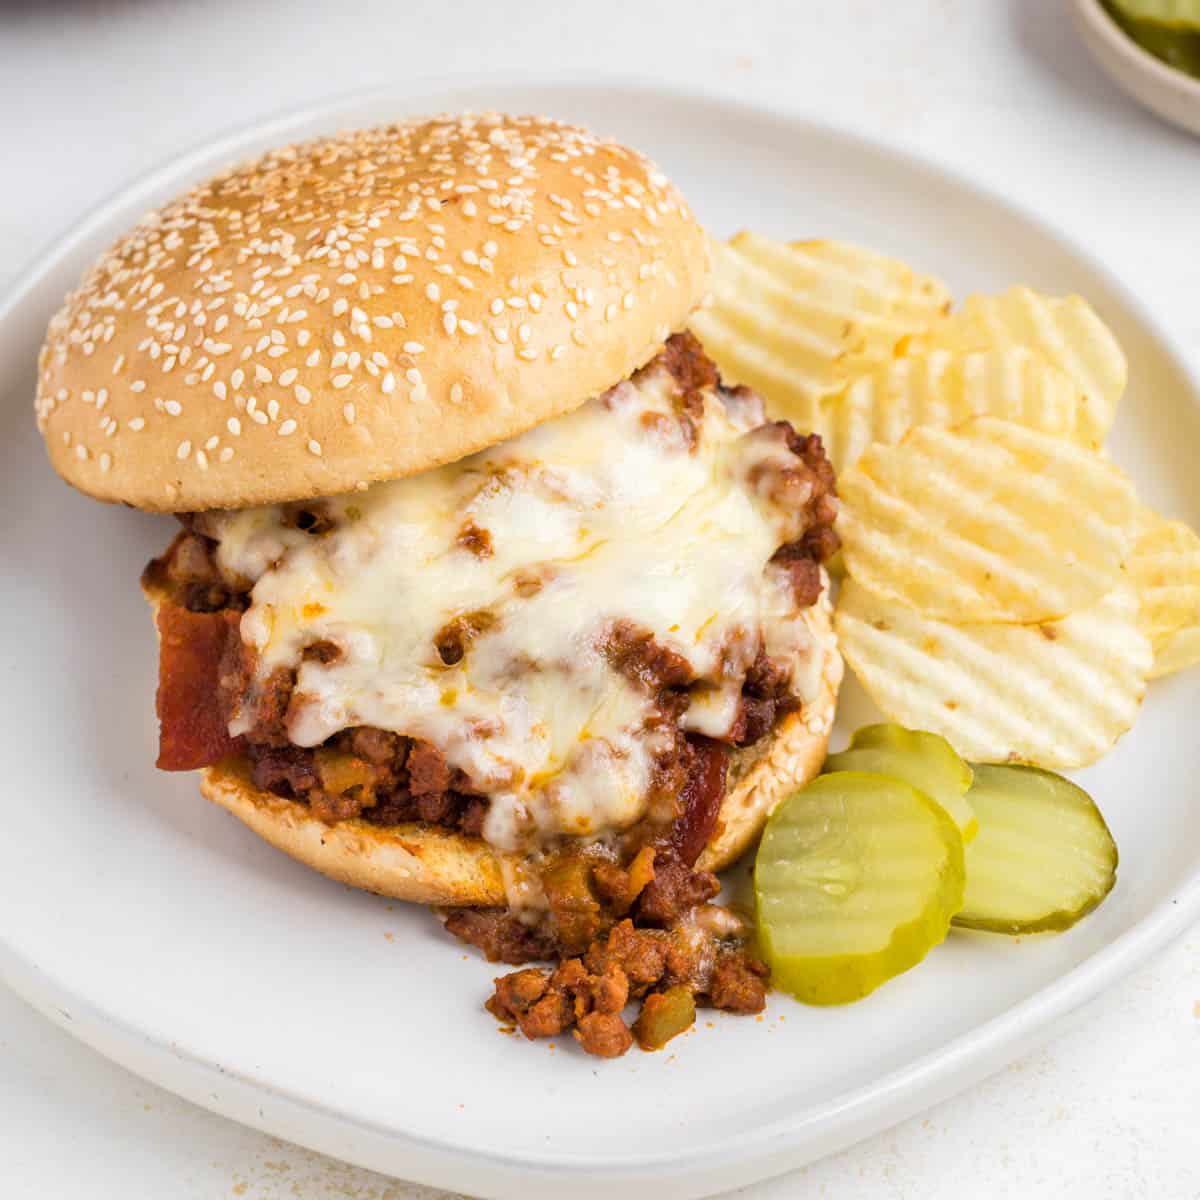 A pizza sloppy joe with melted mozzarella on a toasted sesame seed bun plated with pickles and chips.